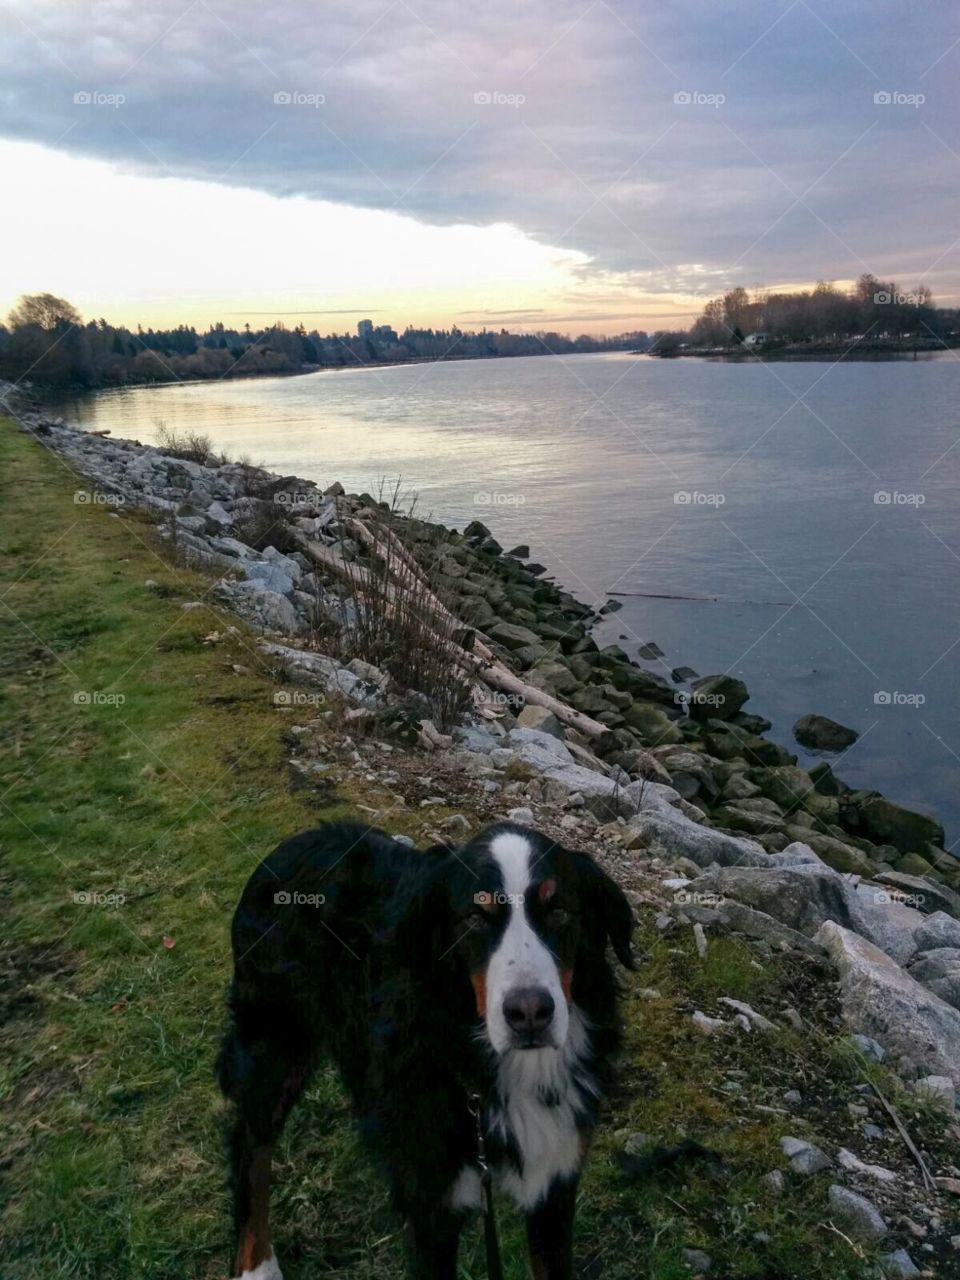 Bernese Mountain dog, Cassie, takes us on a tour along the Fraser River during the Autumn foliage at sunset in Vancouver, British Columbia.